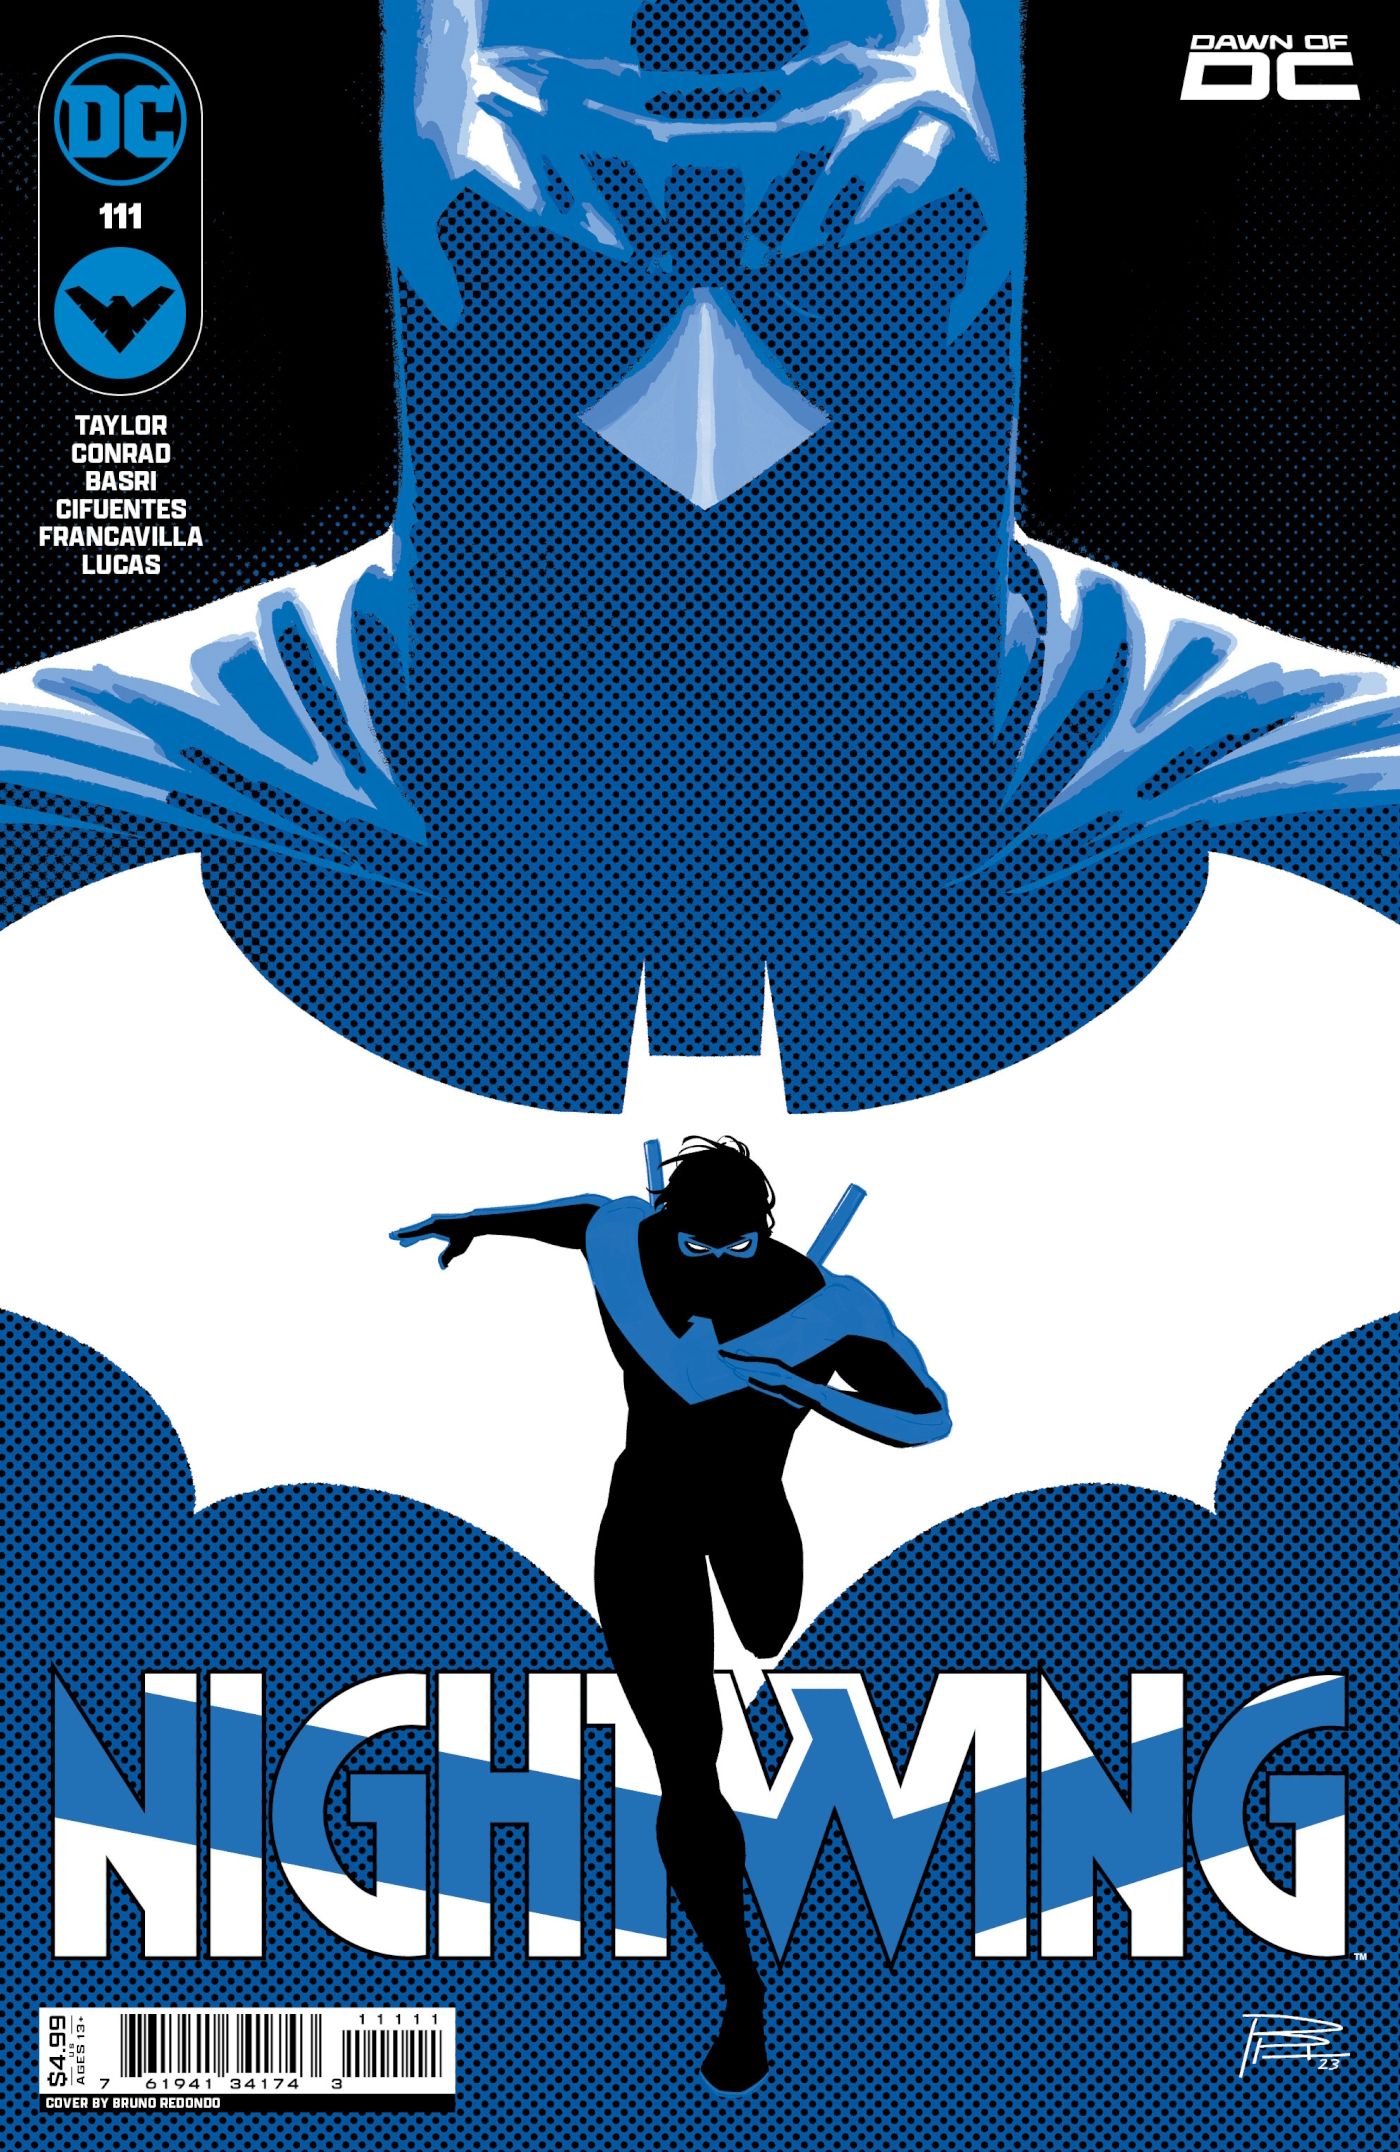 Cover for Nightwing #111, featuring its title character running against a white logo backdrop